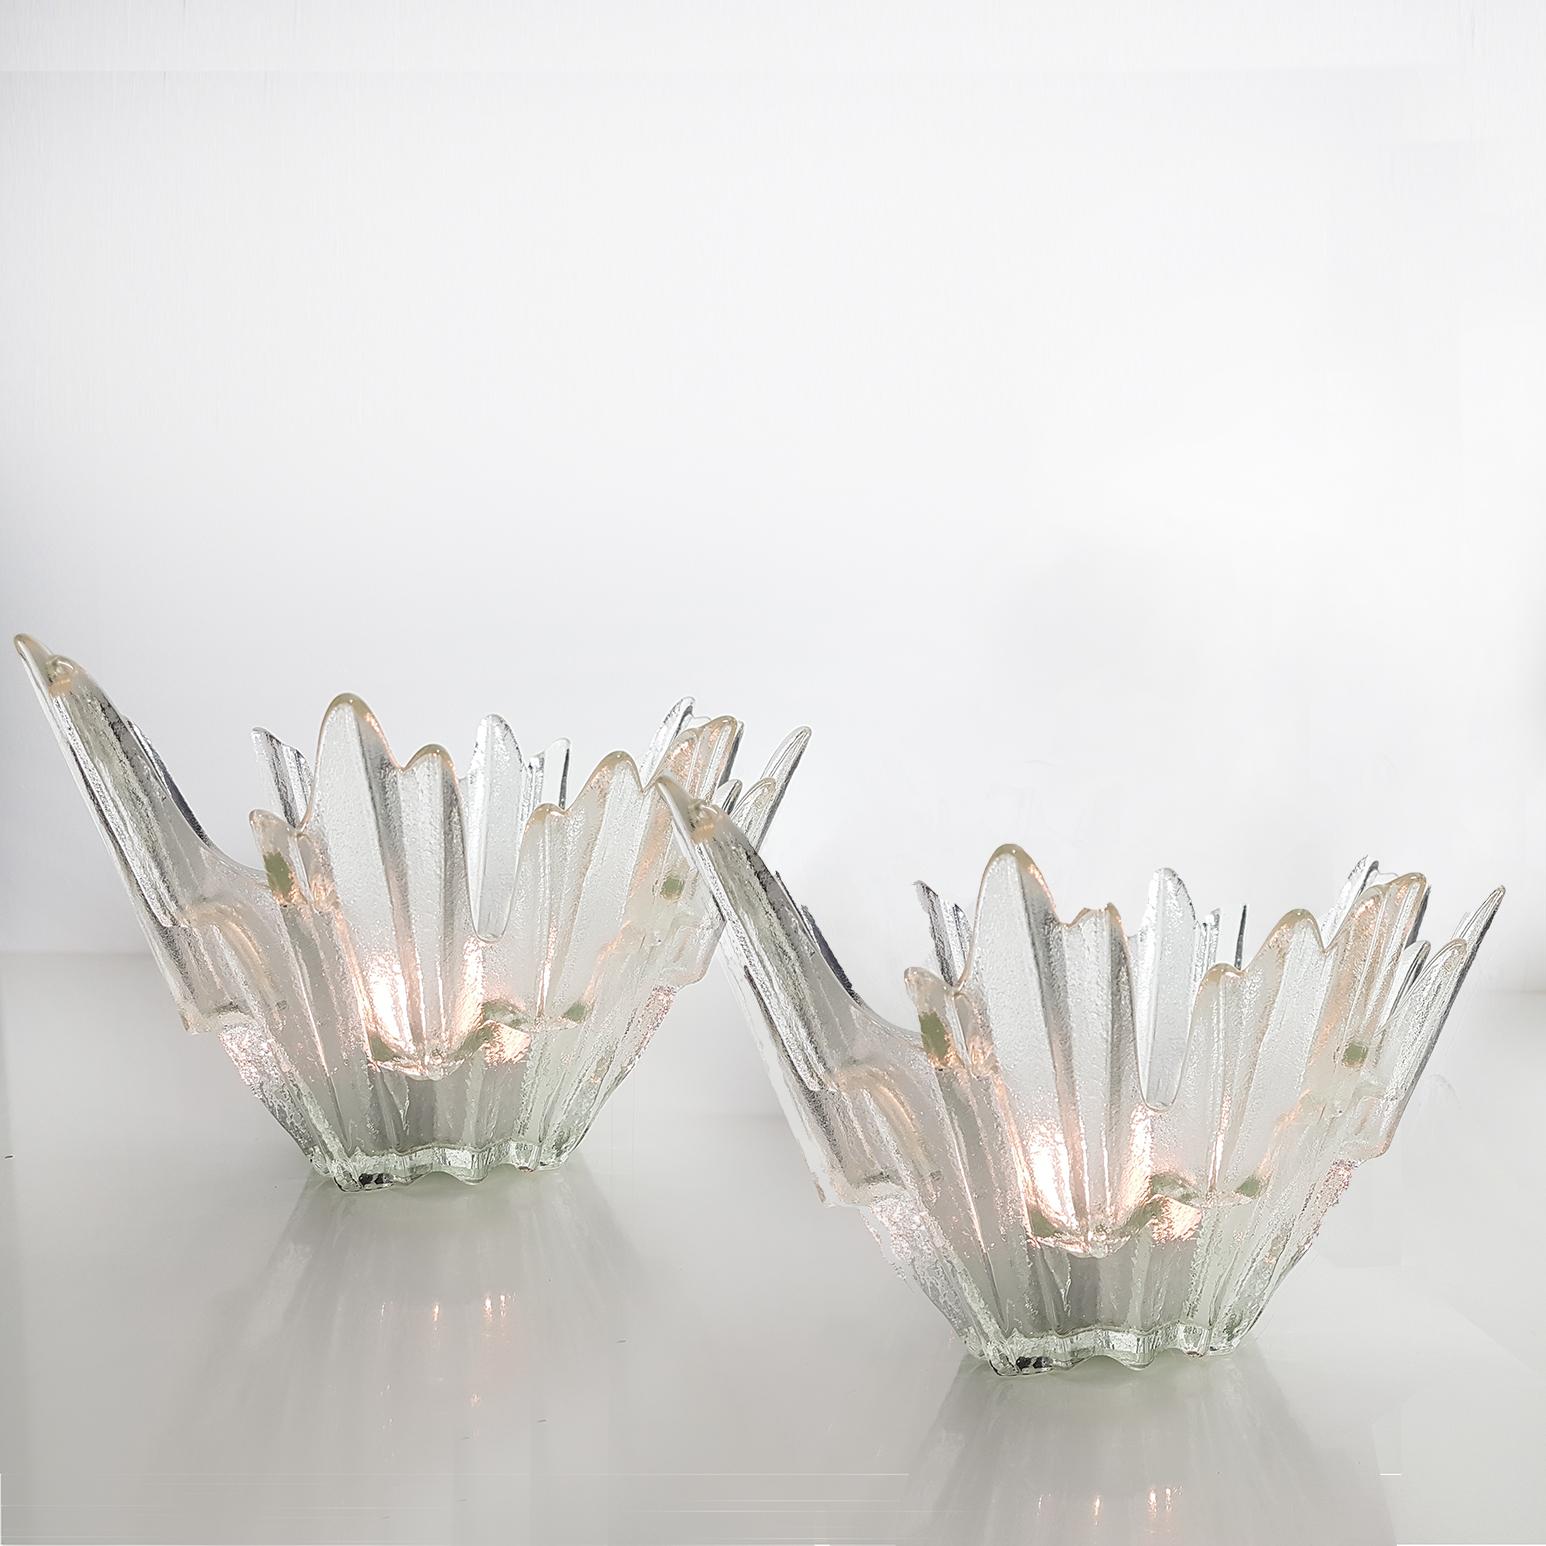 Smaller (Northern Lights) bowls designed by Tauno Wirkkala for Humppila, Finland, circa 1960s. Illuminates beautifully.

Measures: Diameter 6 1/4 in. height 3.5 in. 

Beautiful ice glass with a stunning geological pattern. 
Excellent condition,